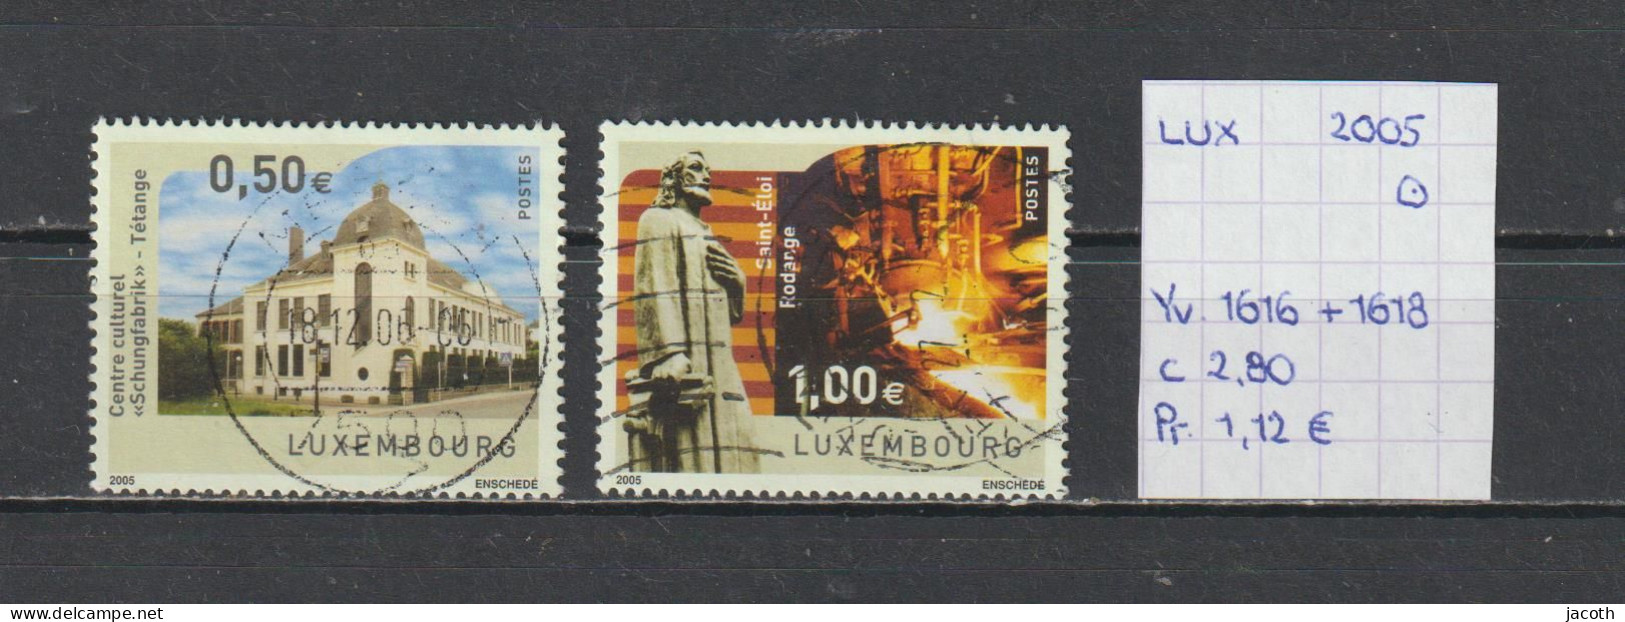 (TJ) Luxembourg 2005 - YT 1616 + 1618 (gest./obl./used) - Gebraucht